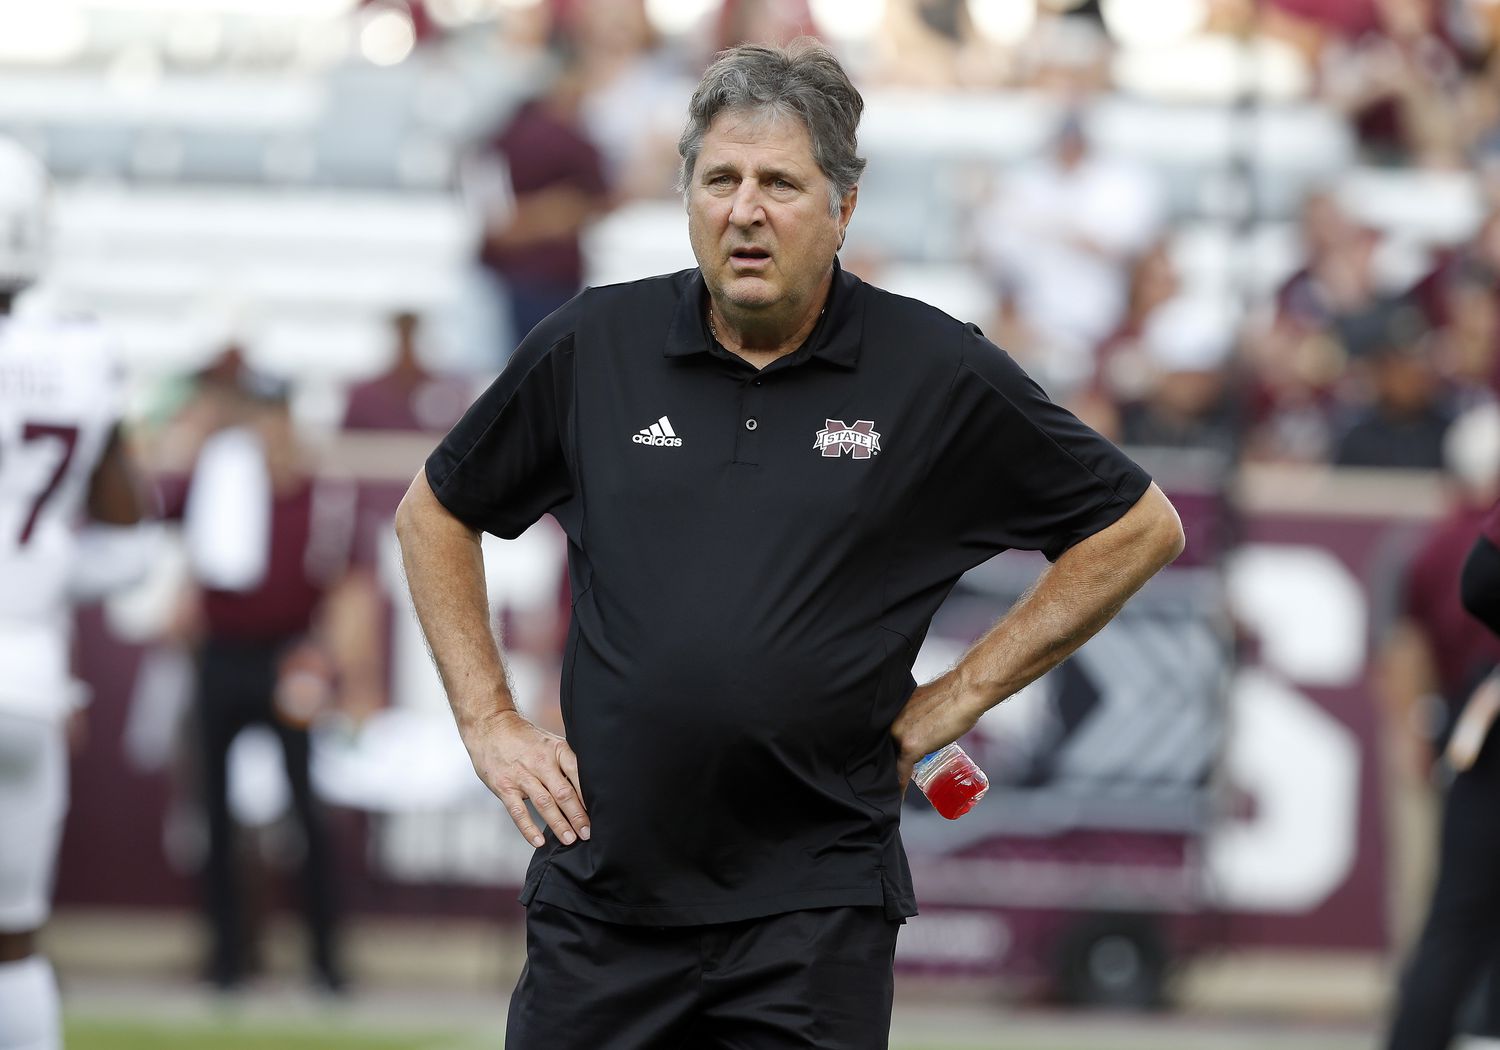 Leach is known for building potent offenses, directing passing-oriented teams in a spread offense system known as the air raid offense, which Leach developed with Hal Mumme when Mumme was head coach and Leach was offensive coordinator at Iowa Wesleyan, Valdosta State, and Kentucky in the 1990s. Leach's offenses with Mumme, and later as a head coach himself, have broken numerous school and NCAA records.[3]